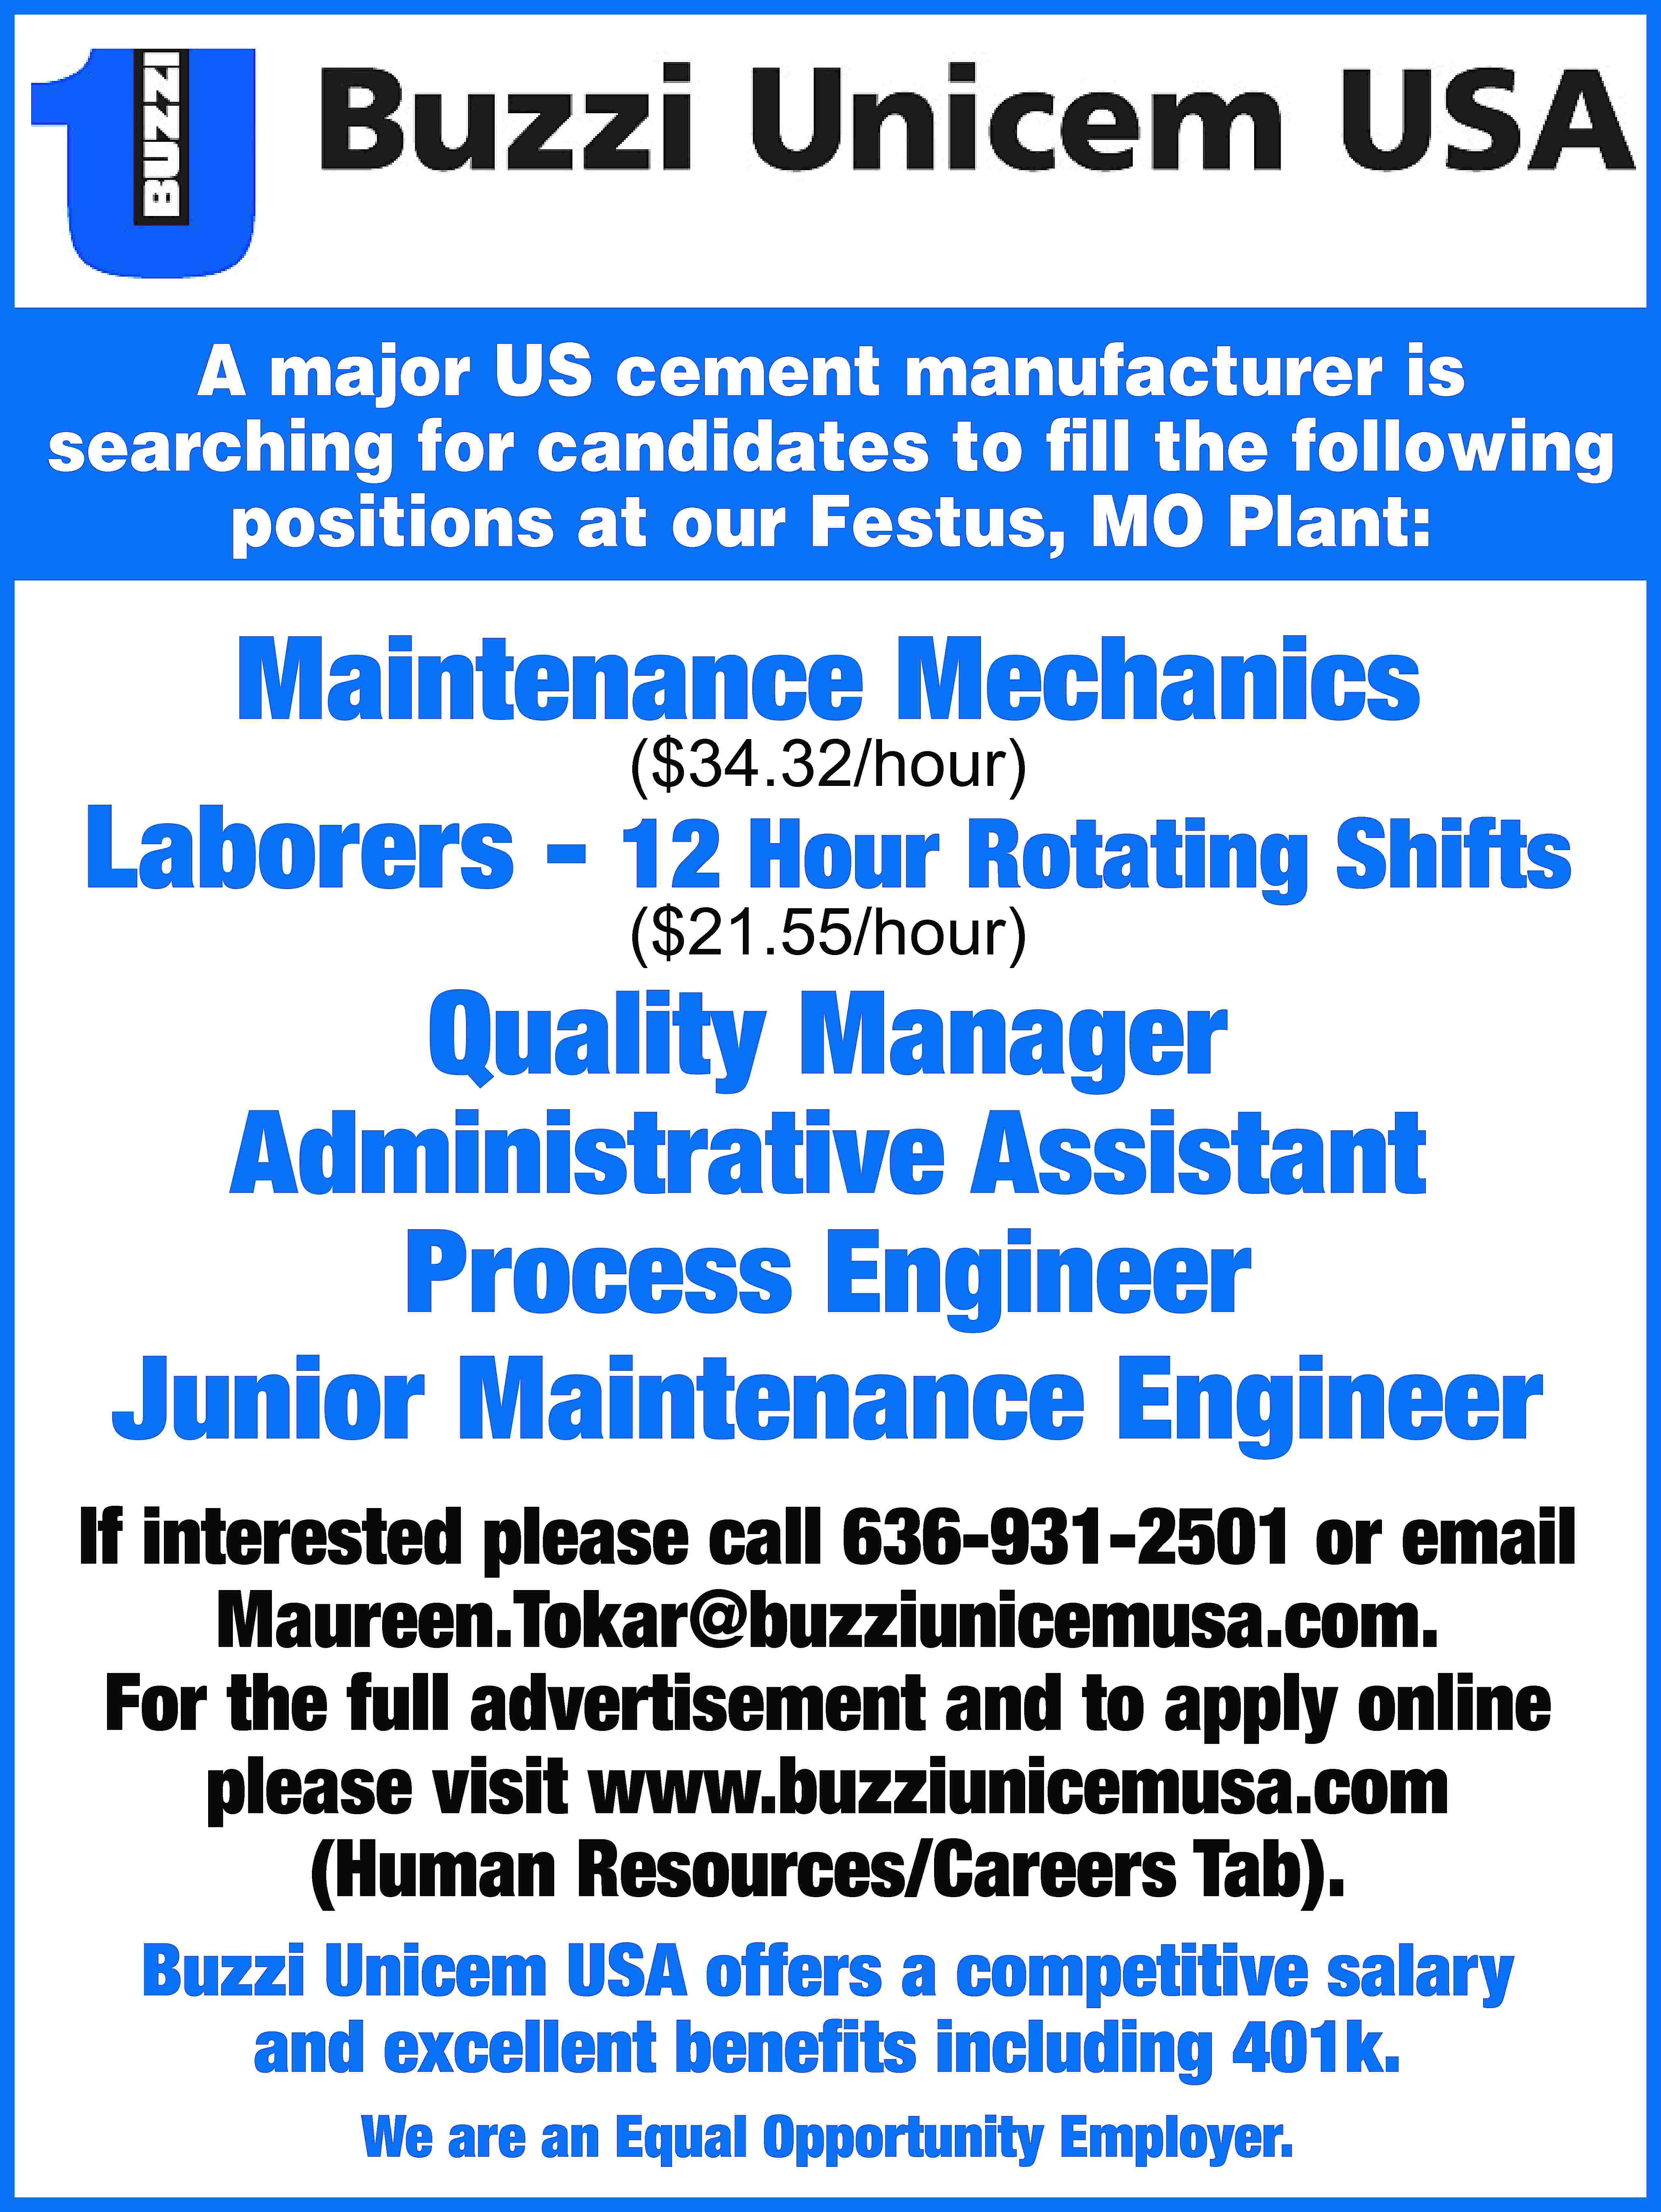 A major US cement manufacturer  A major US cement manufacturer is searching for candidates to fill the following positions at our Festus, MO Plant: Maintenance Mechanics ($34.32/hour) Laborers - 12 Hour Rotating Shifts ($21.55/hour) Quality Manager Administrative Assistant Process Engineer Junior Maintenance Engineer If interested please call 636-931-2501 or email Maureen.Tokar@buzziunicemusa.com. For the full advertisement and to apply online please visit www.buzziunicemusa.com (Human Resources/Careers Tab). Buzzi Unicem USA offers a competitive salary and excellent benefits including 401k. We are an Equal Opportunity Employer.